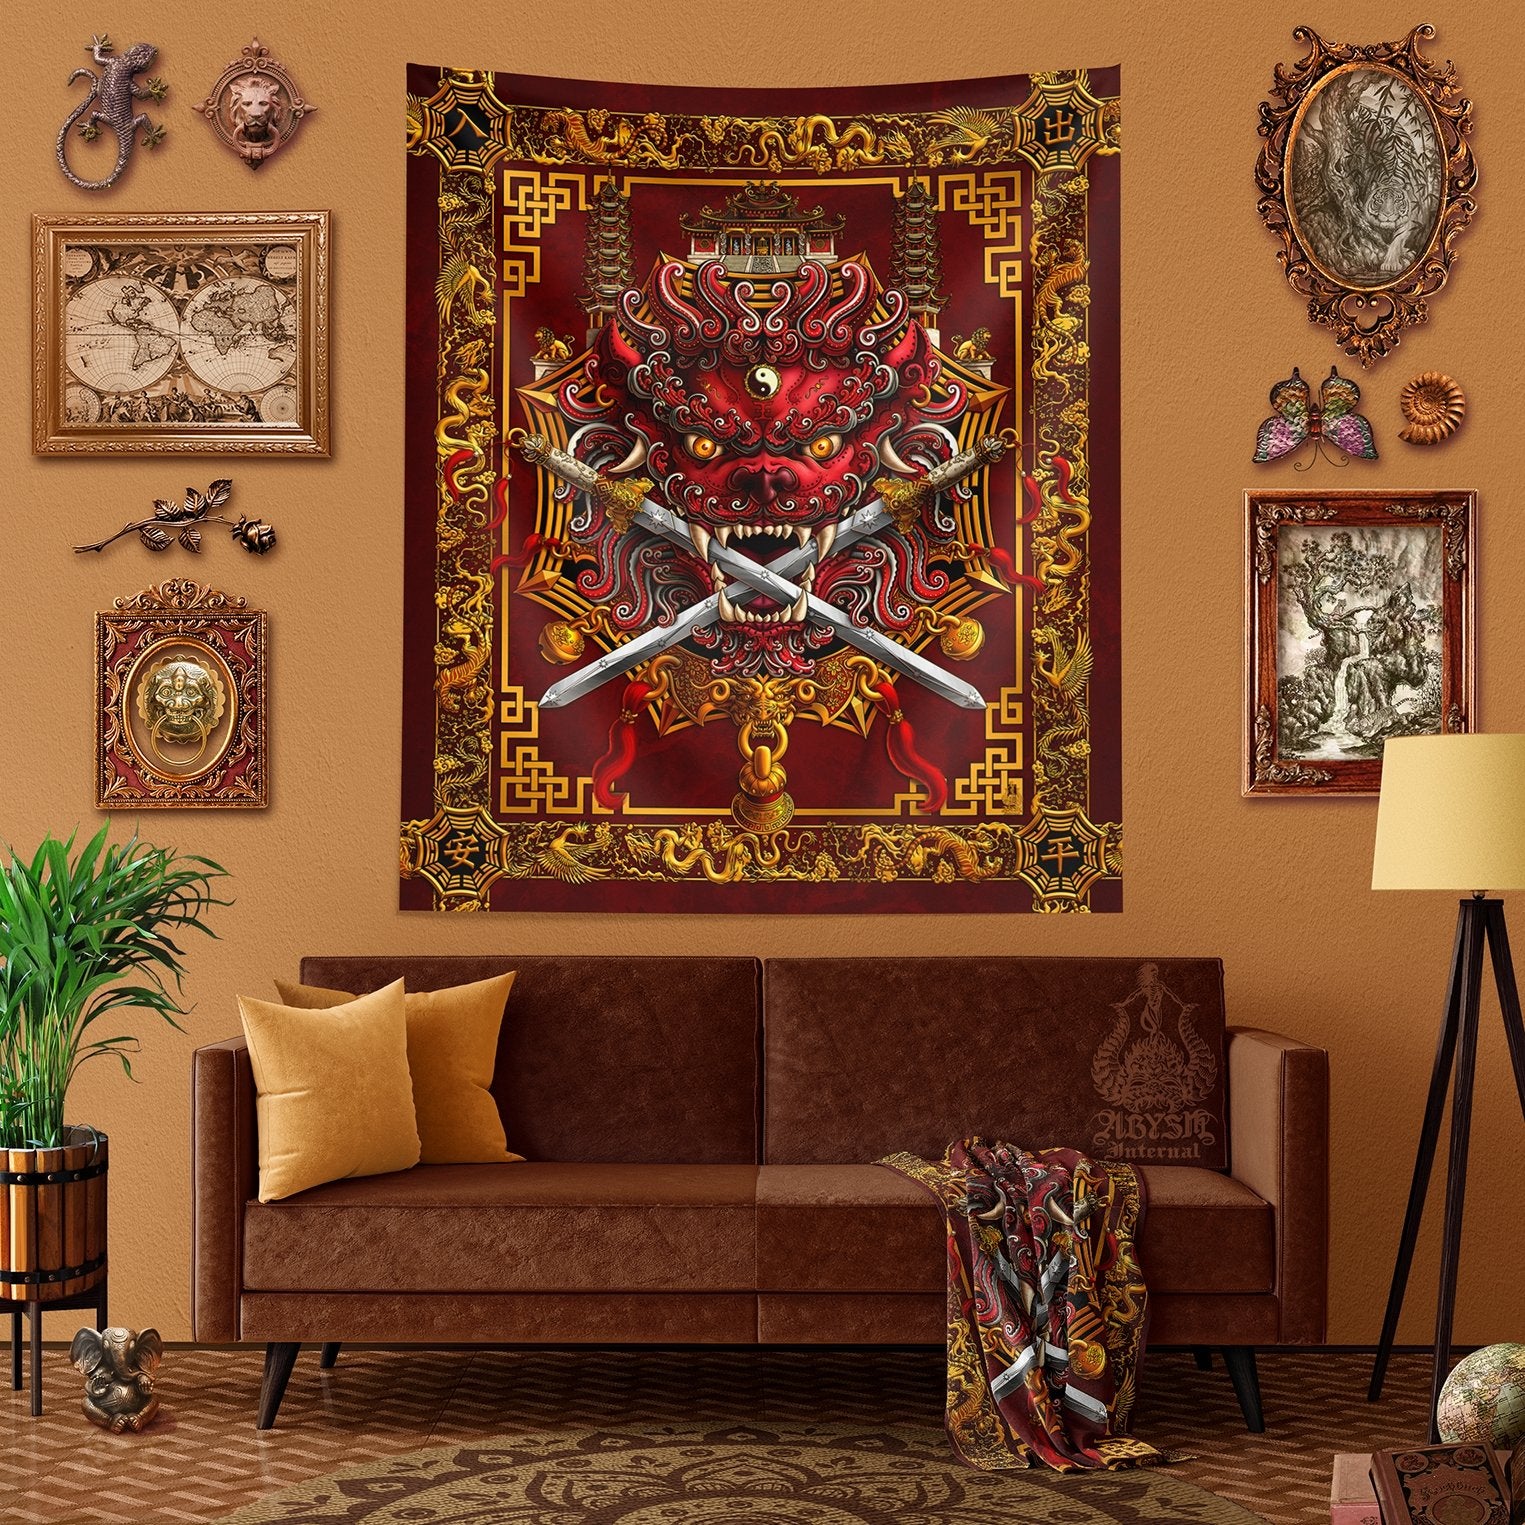 Lion Tapestry, Taiwan Sword Lion, Chinese Wall Hanging, Gamer Home Decor, Asian Mythology - Red - Abysm Internal